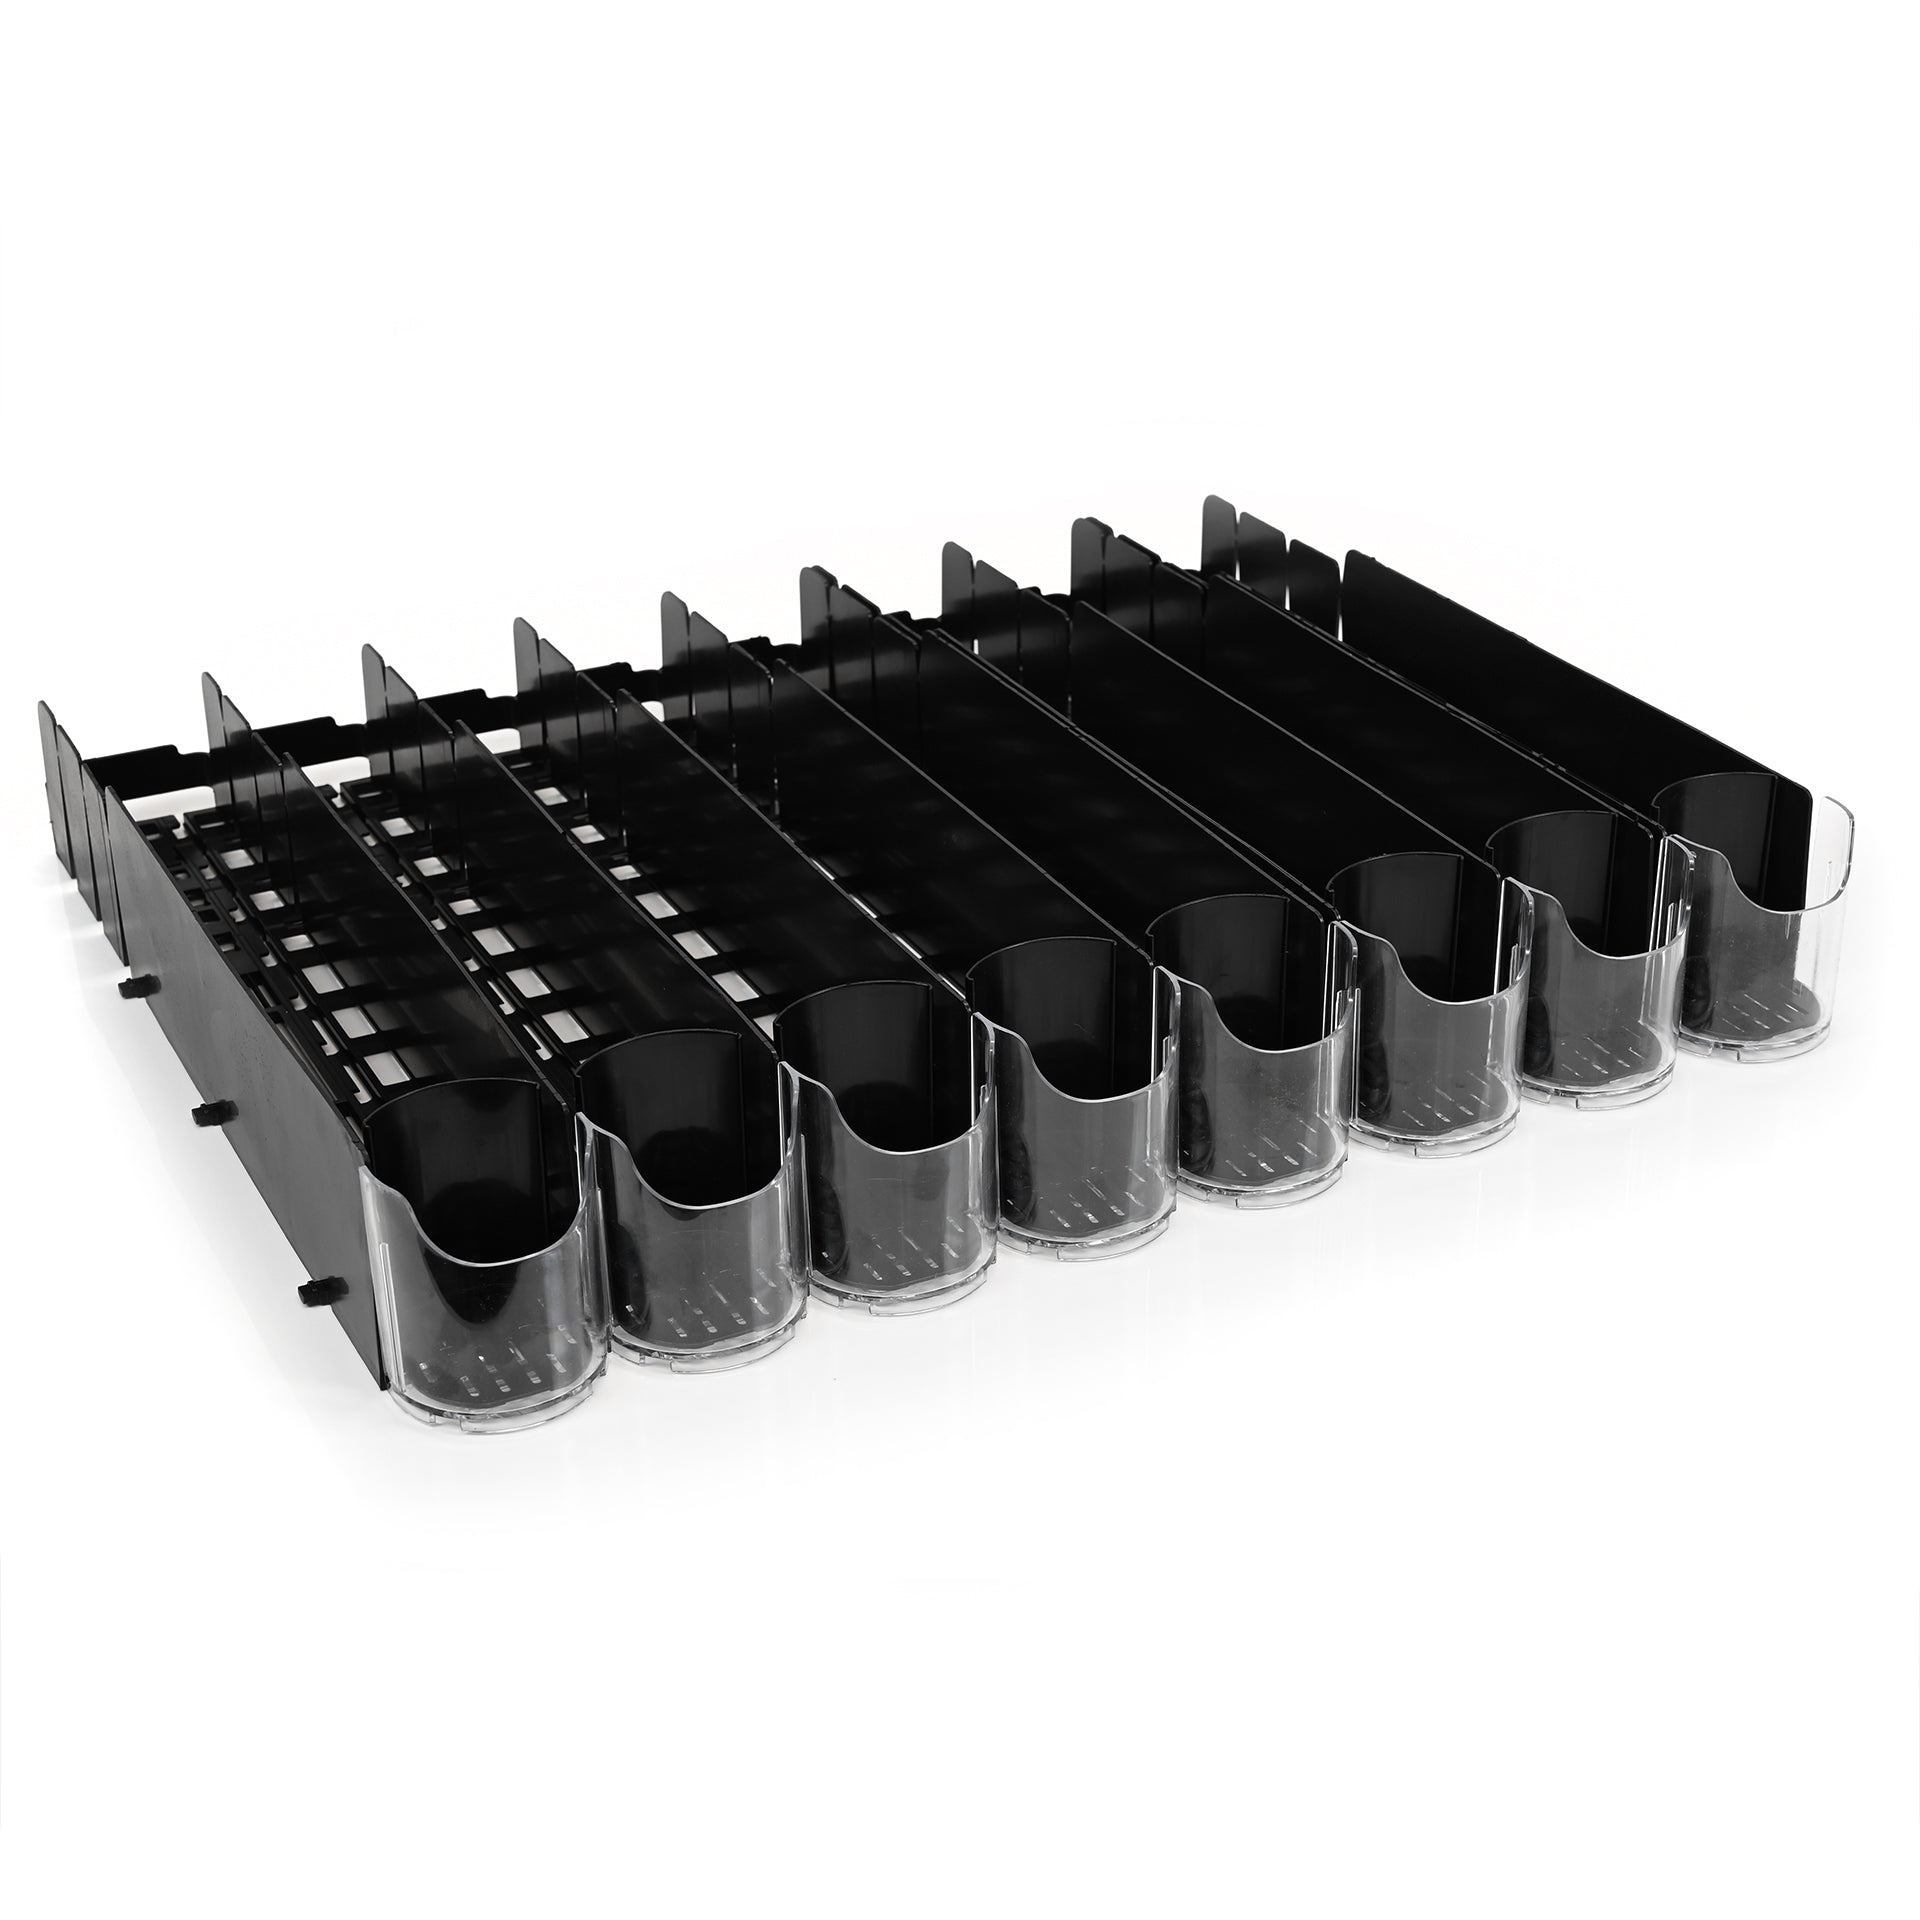 Expandable Shelf Divider with Pusher System, 19 Deep